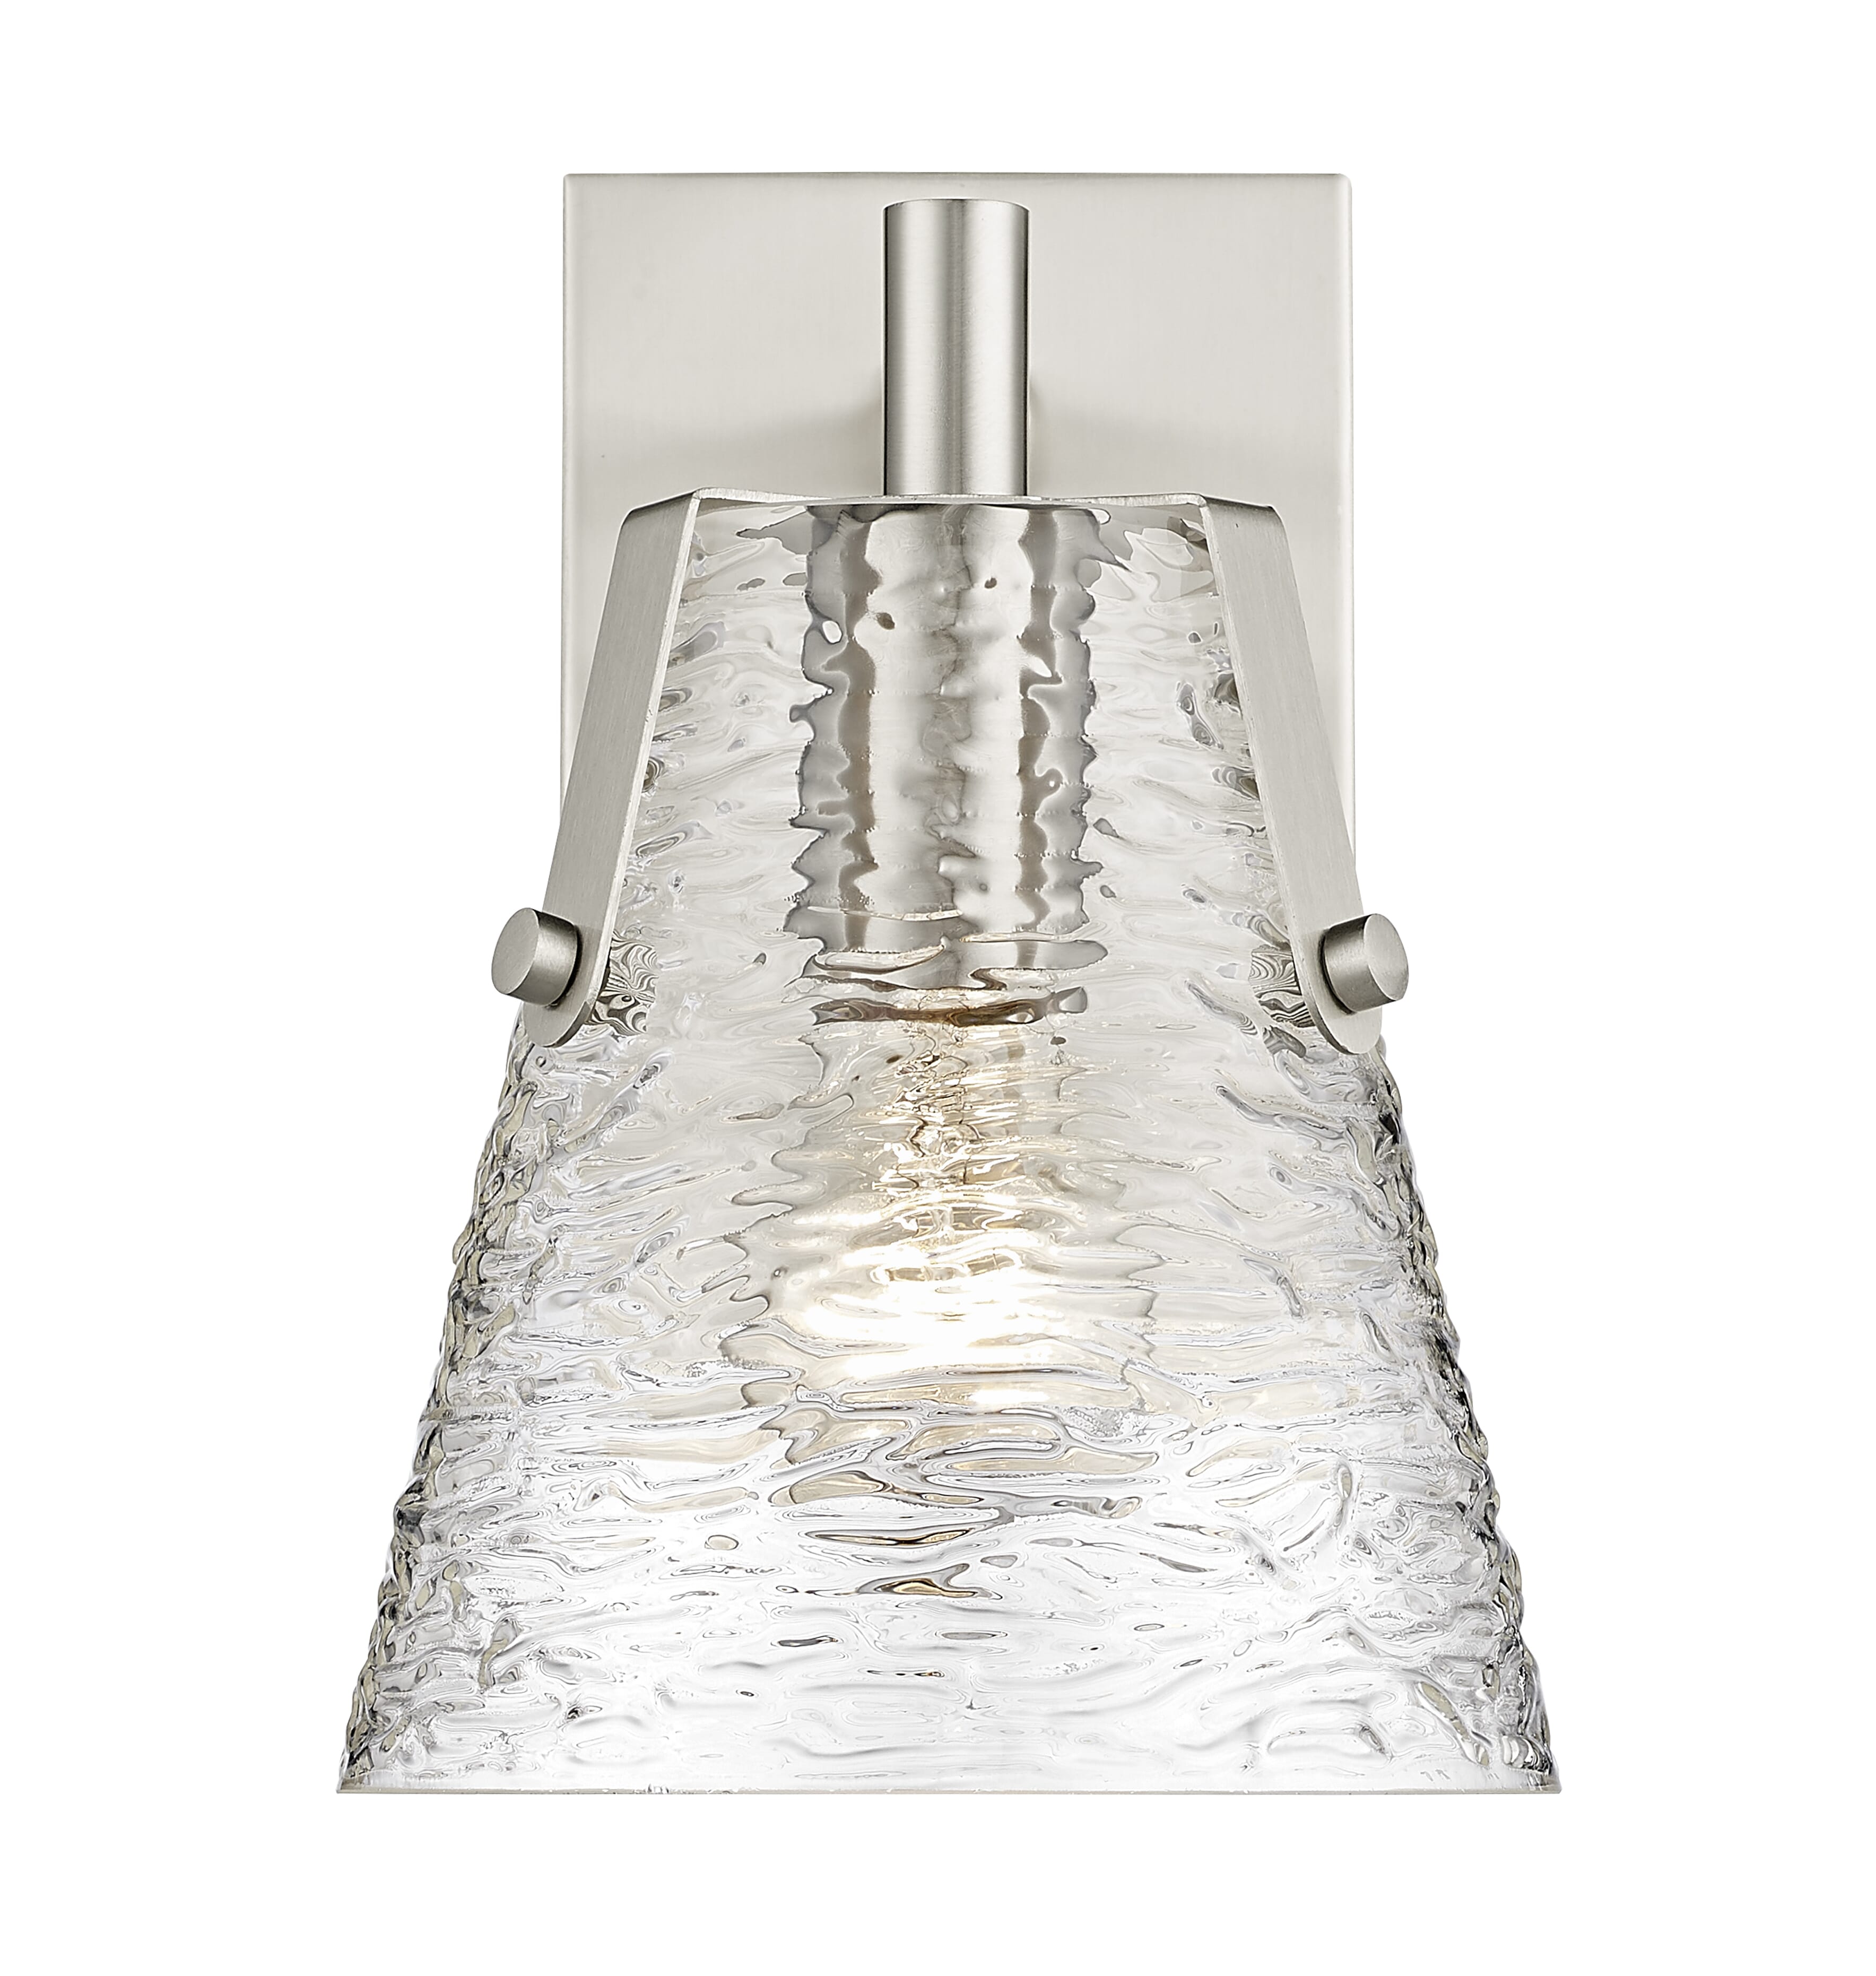 Analia 1-Light Wall Sconce in Brushed Nickel